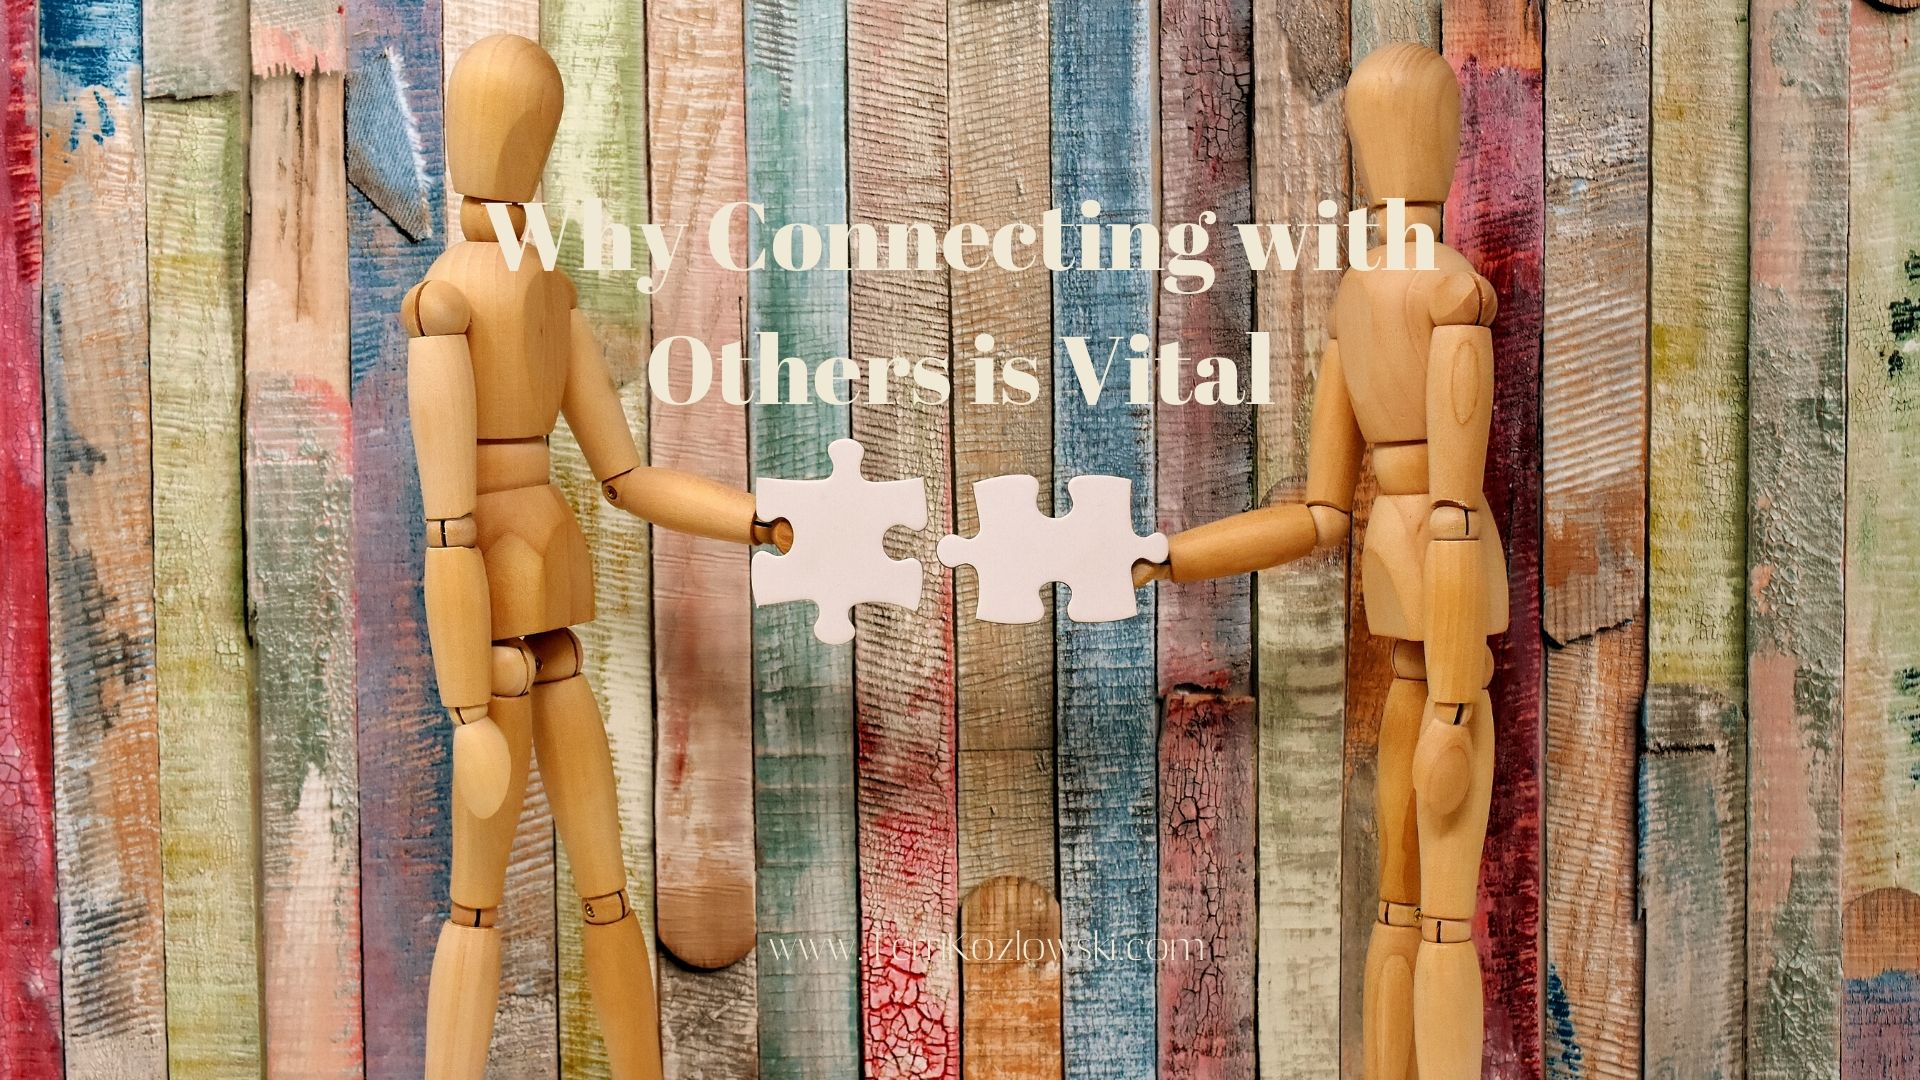 Connection is Vital